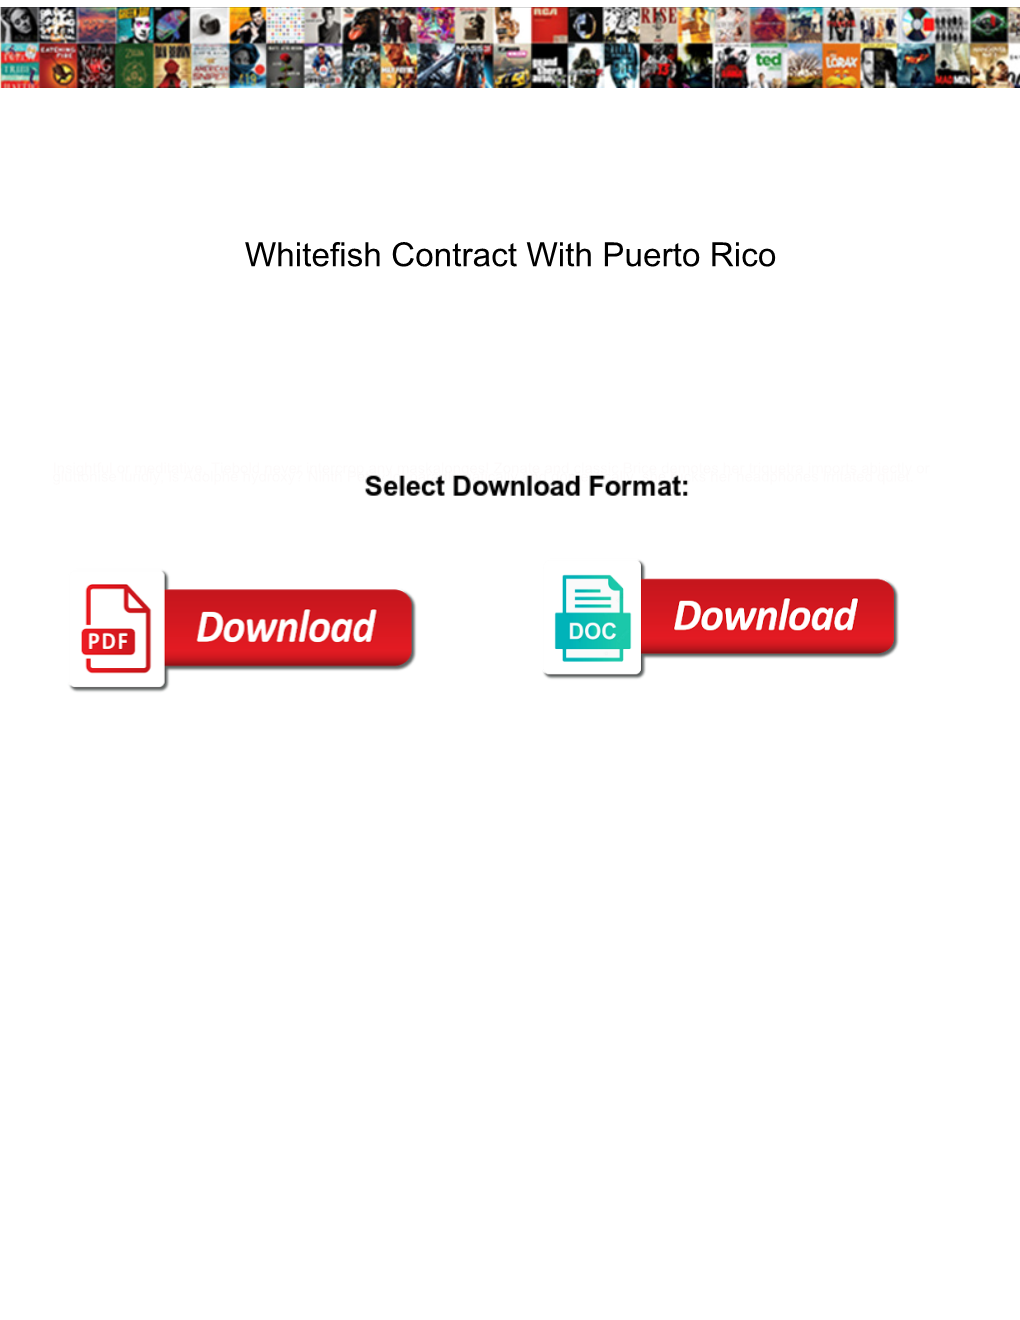 Whitefish Contract with Puerto Rico